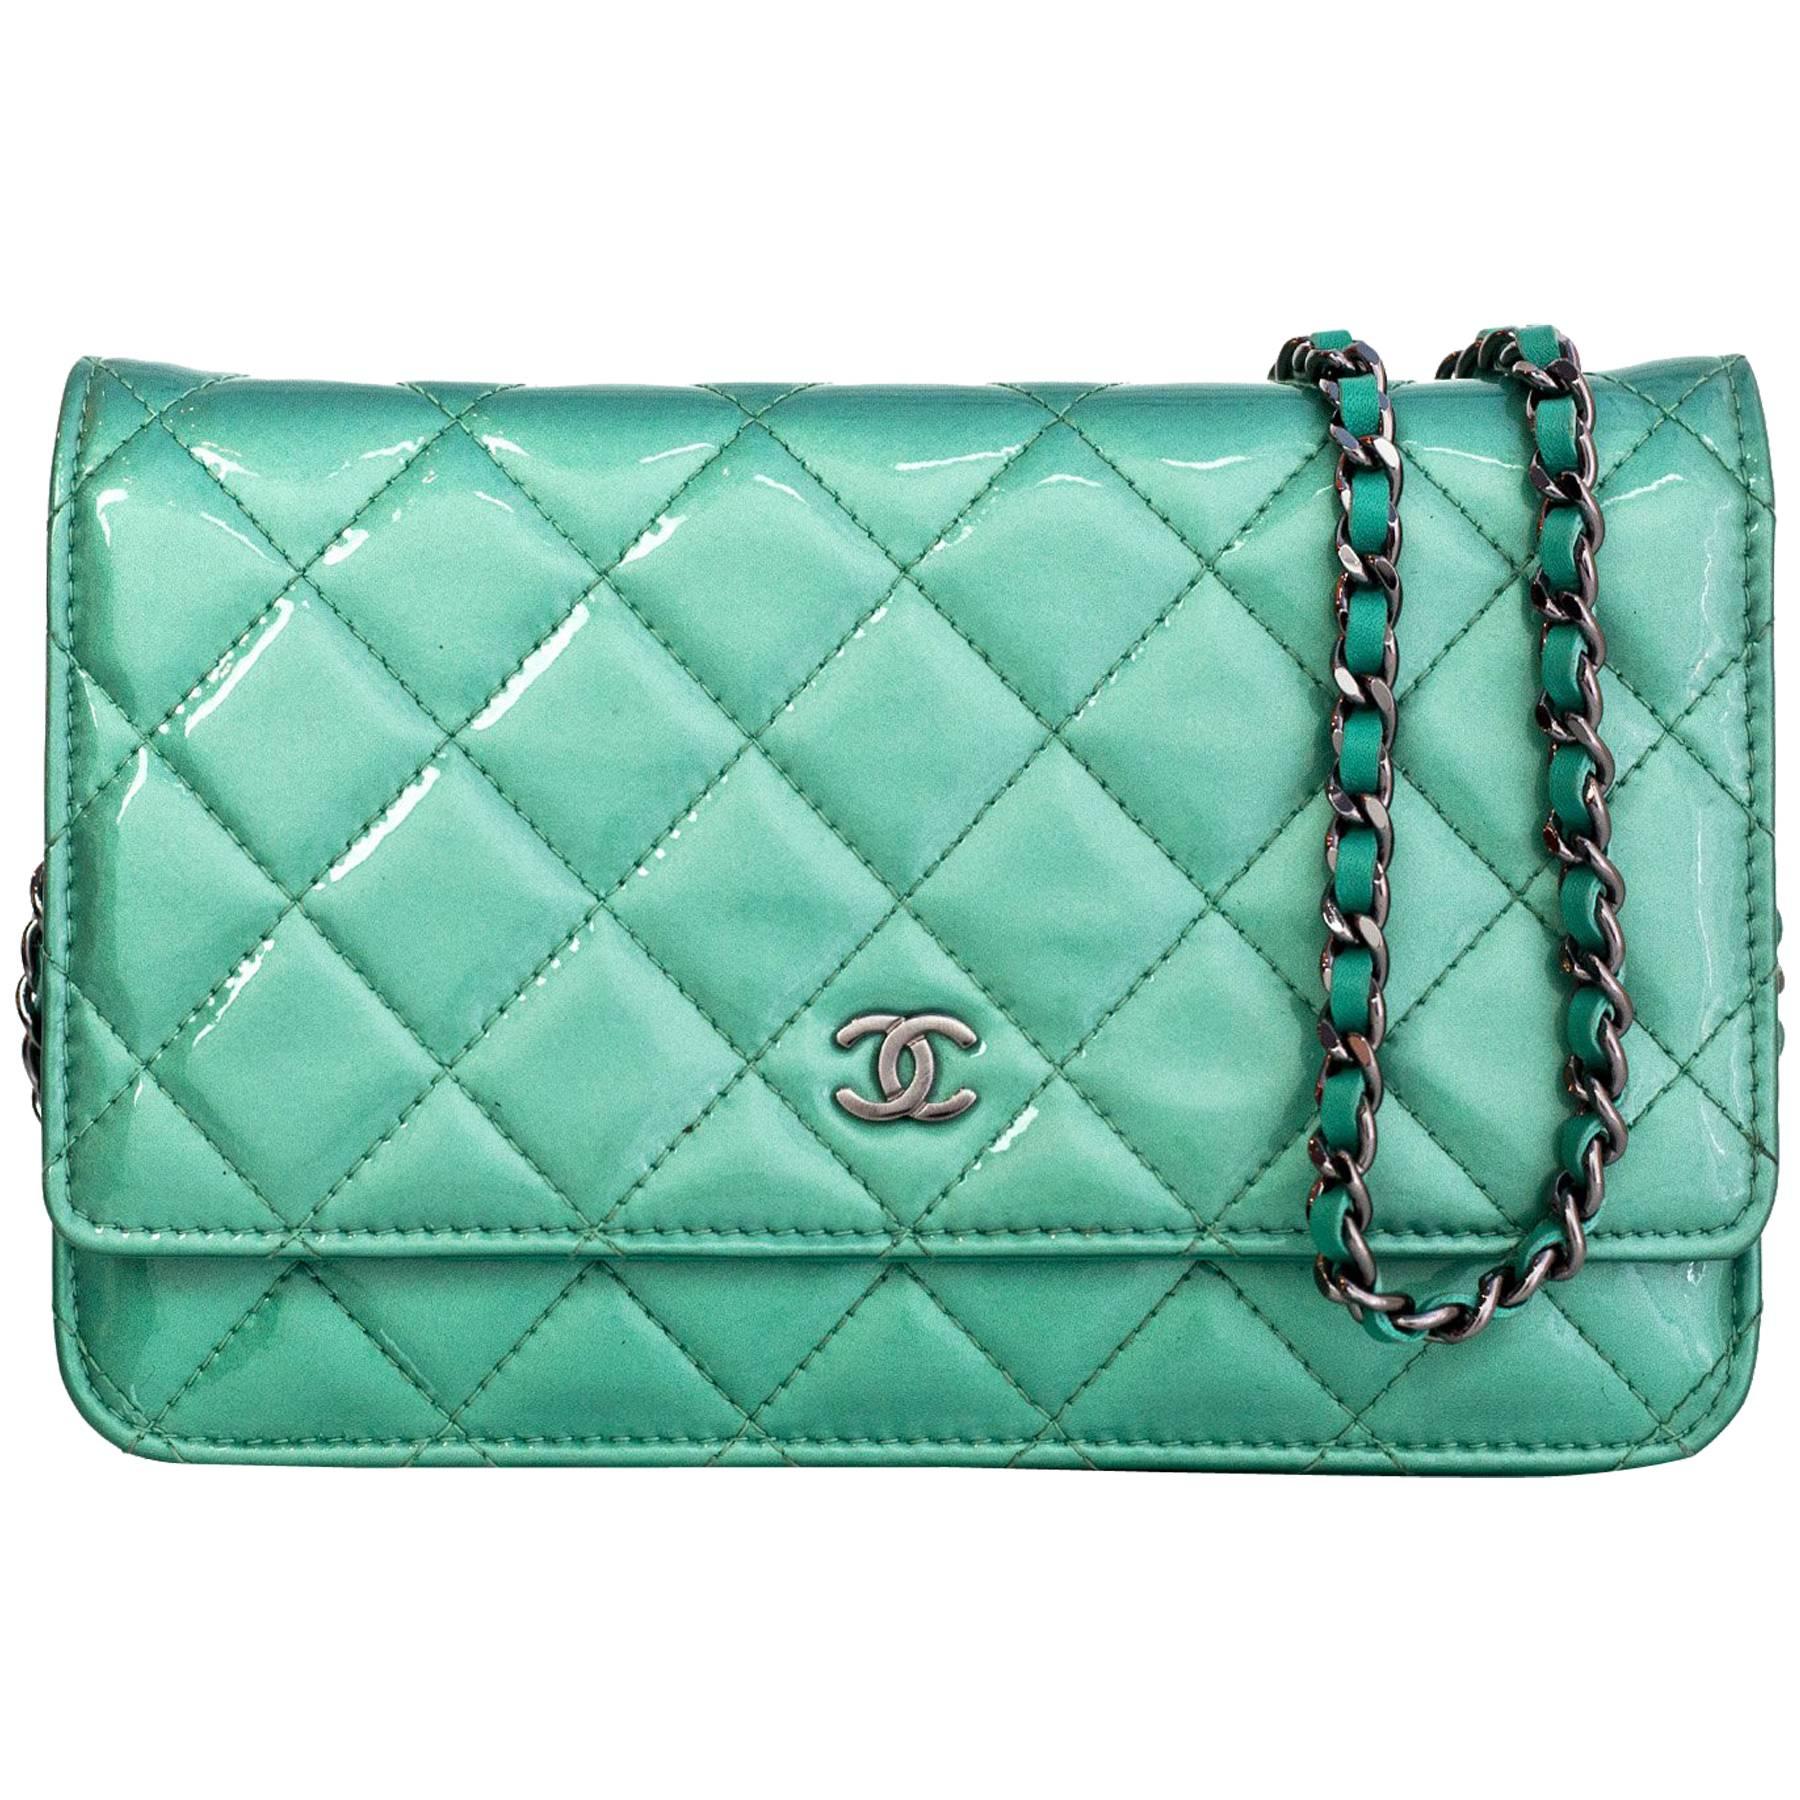 Chanel Seafoam Green Patent Leather WOC Wallet on a Chain